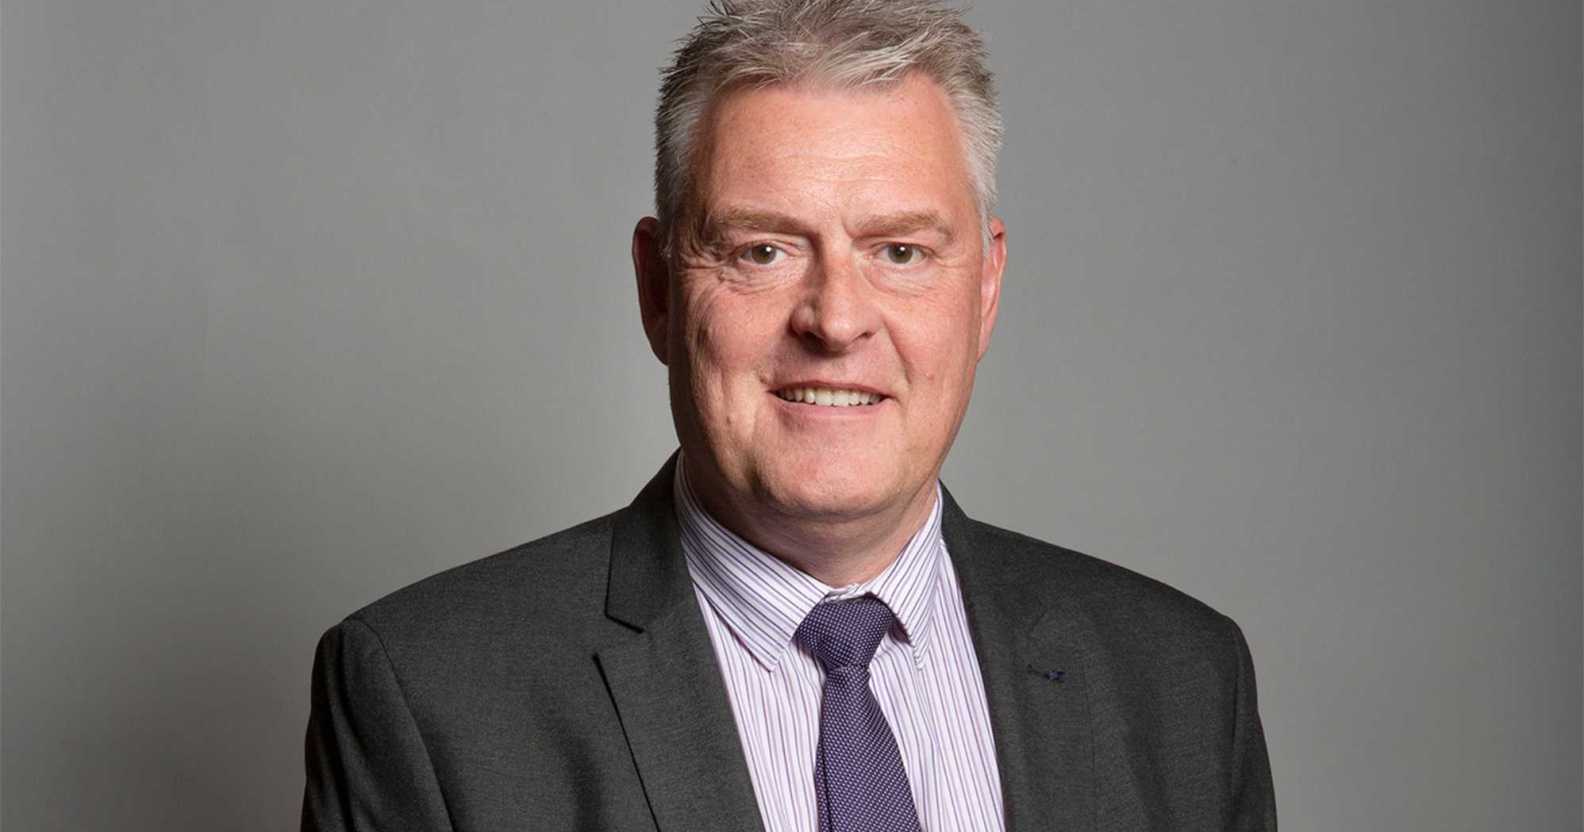 Lee Anderson pictured in his official parliamentary portrait. He is wearing a grey suit with a dark coloured tie and is standing against a grey background.